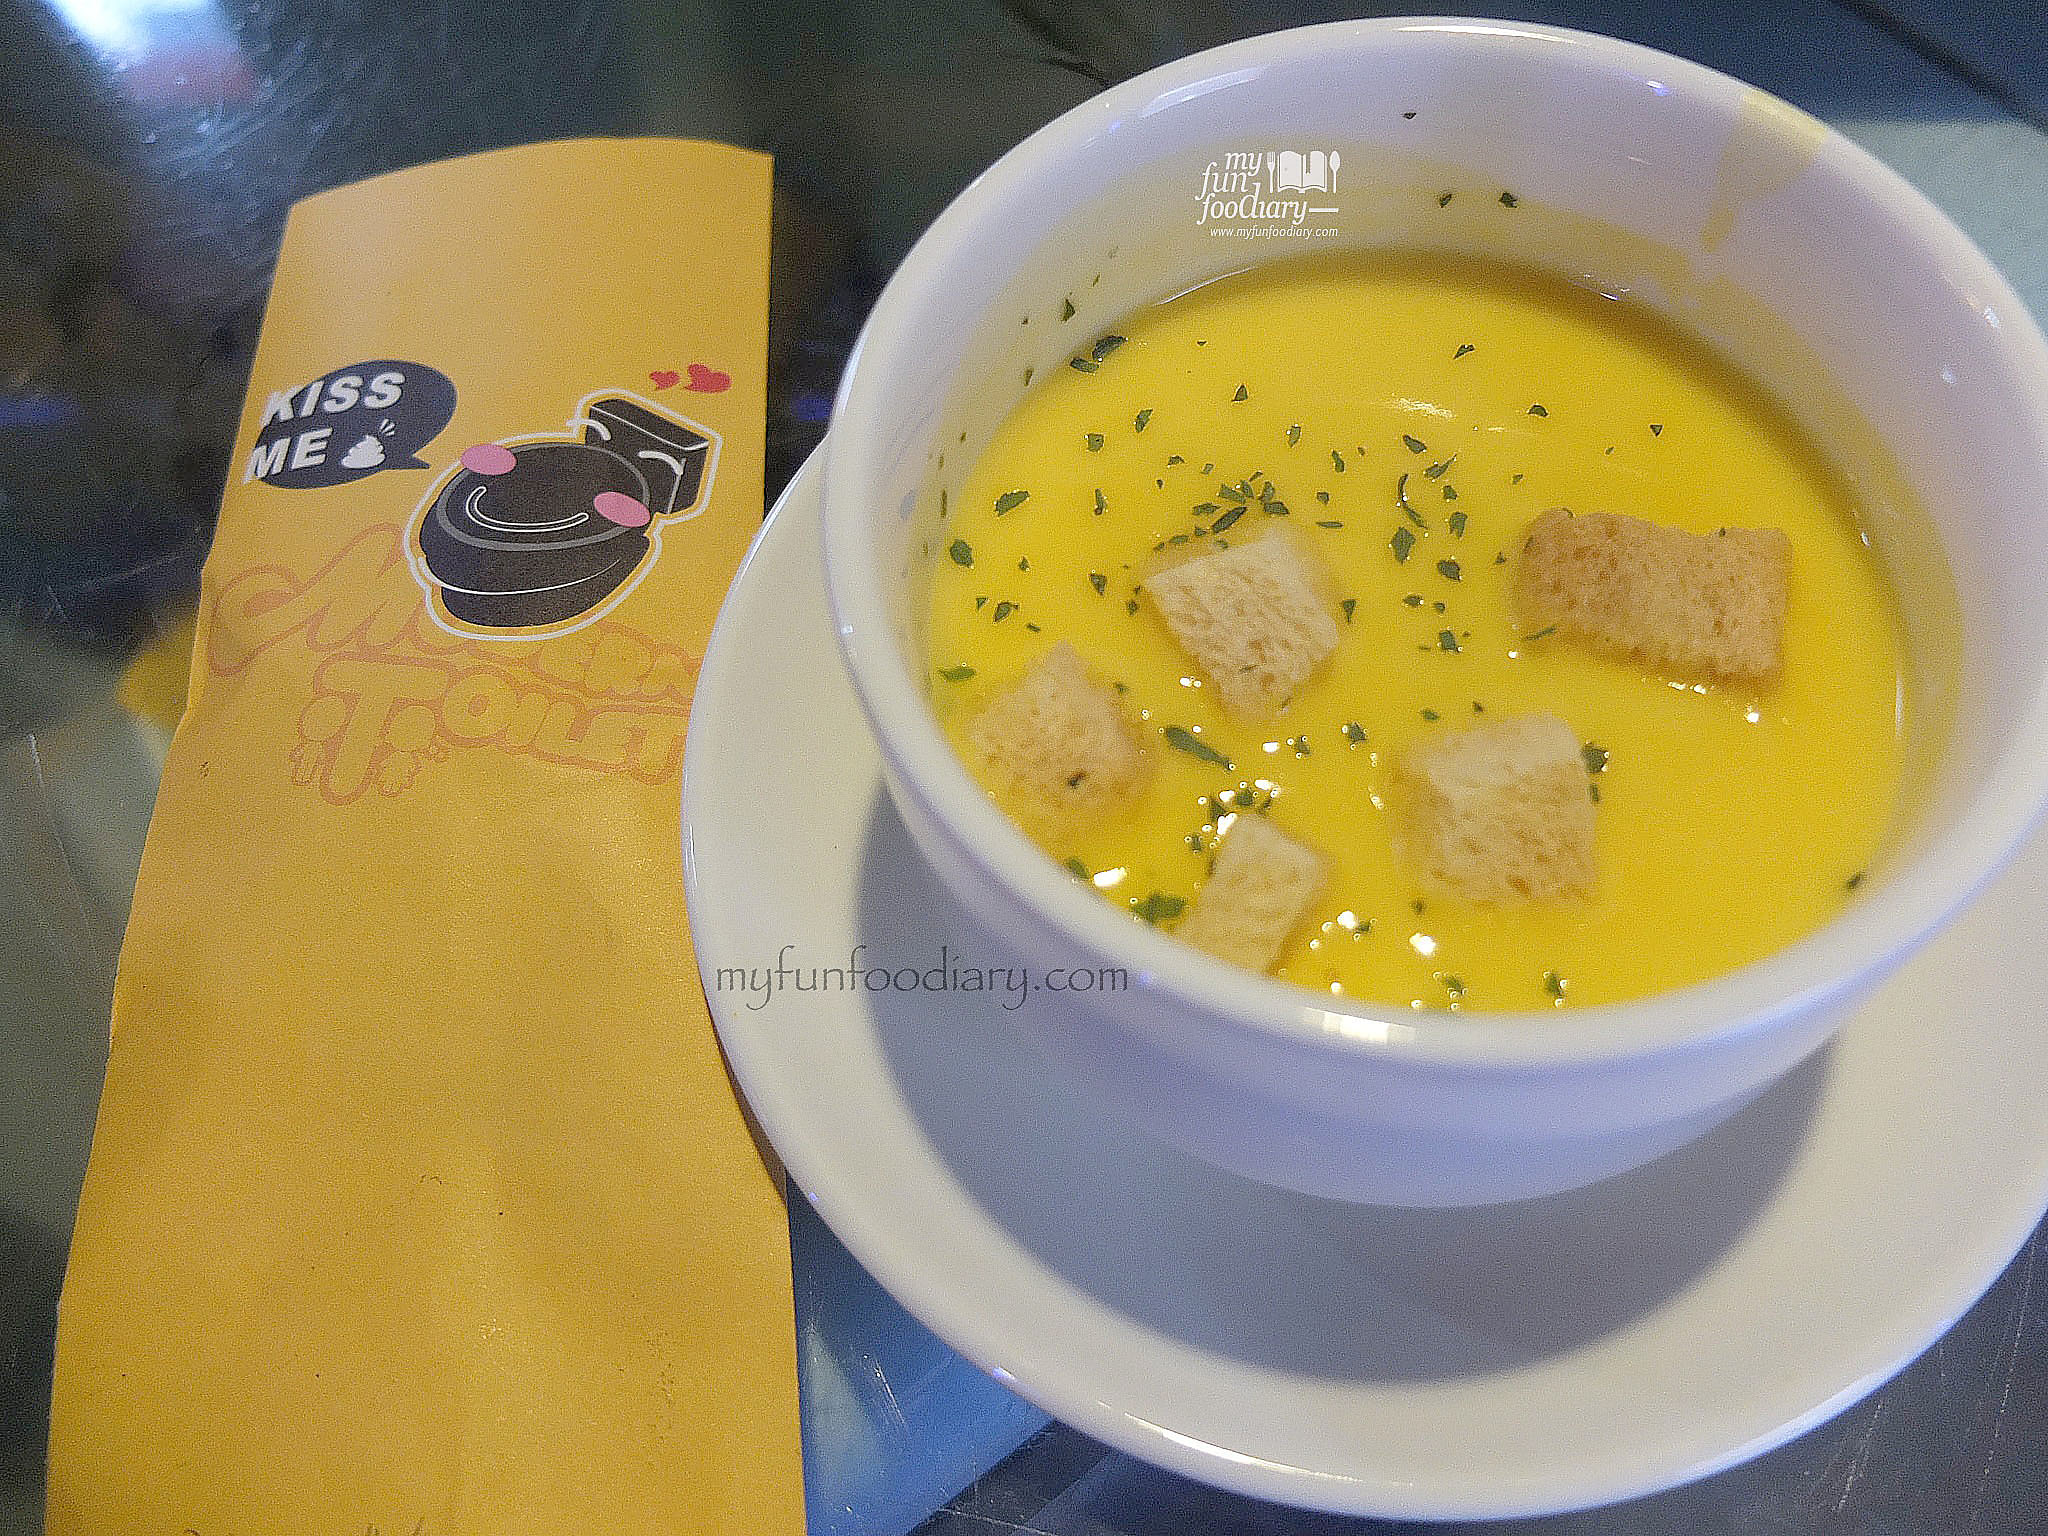 Free Soup of The Day at Modern Toilet Cafe Taiwan by Myfunfoodiary 01 copy